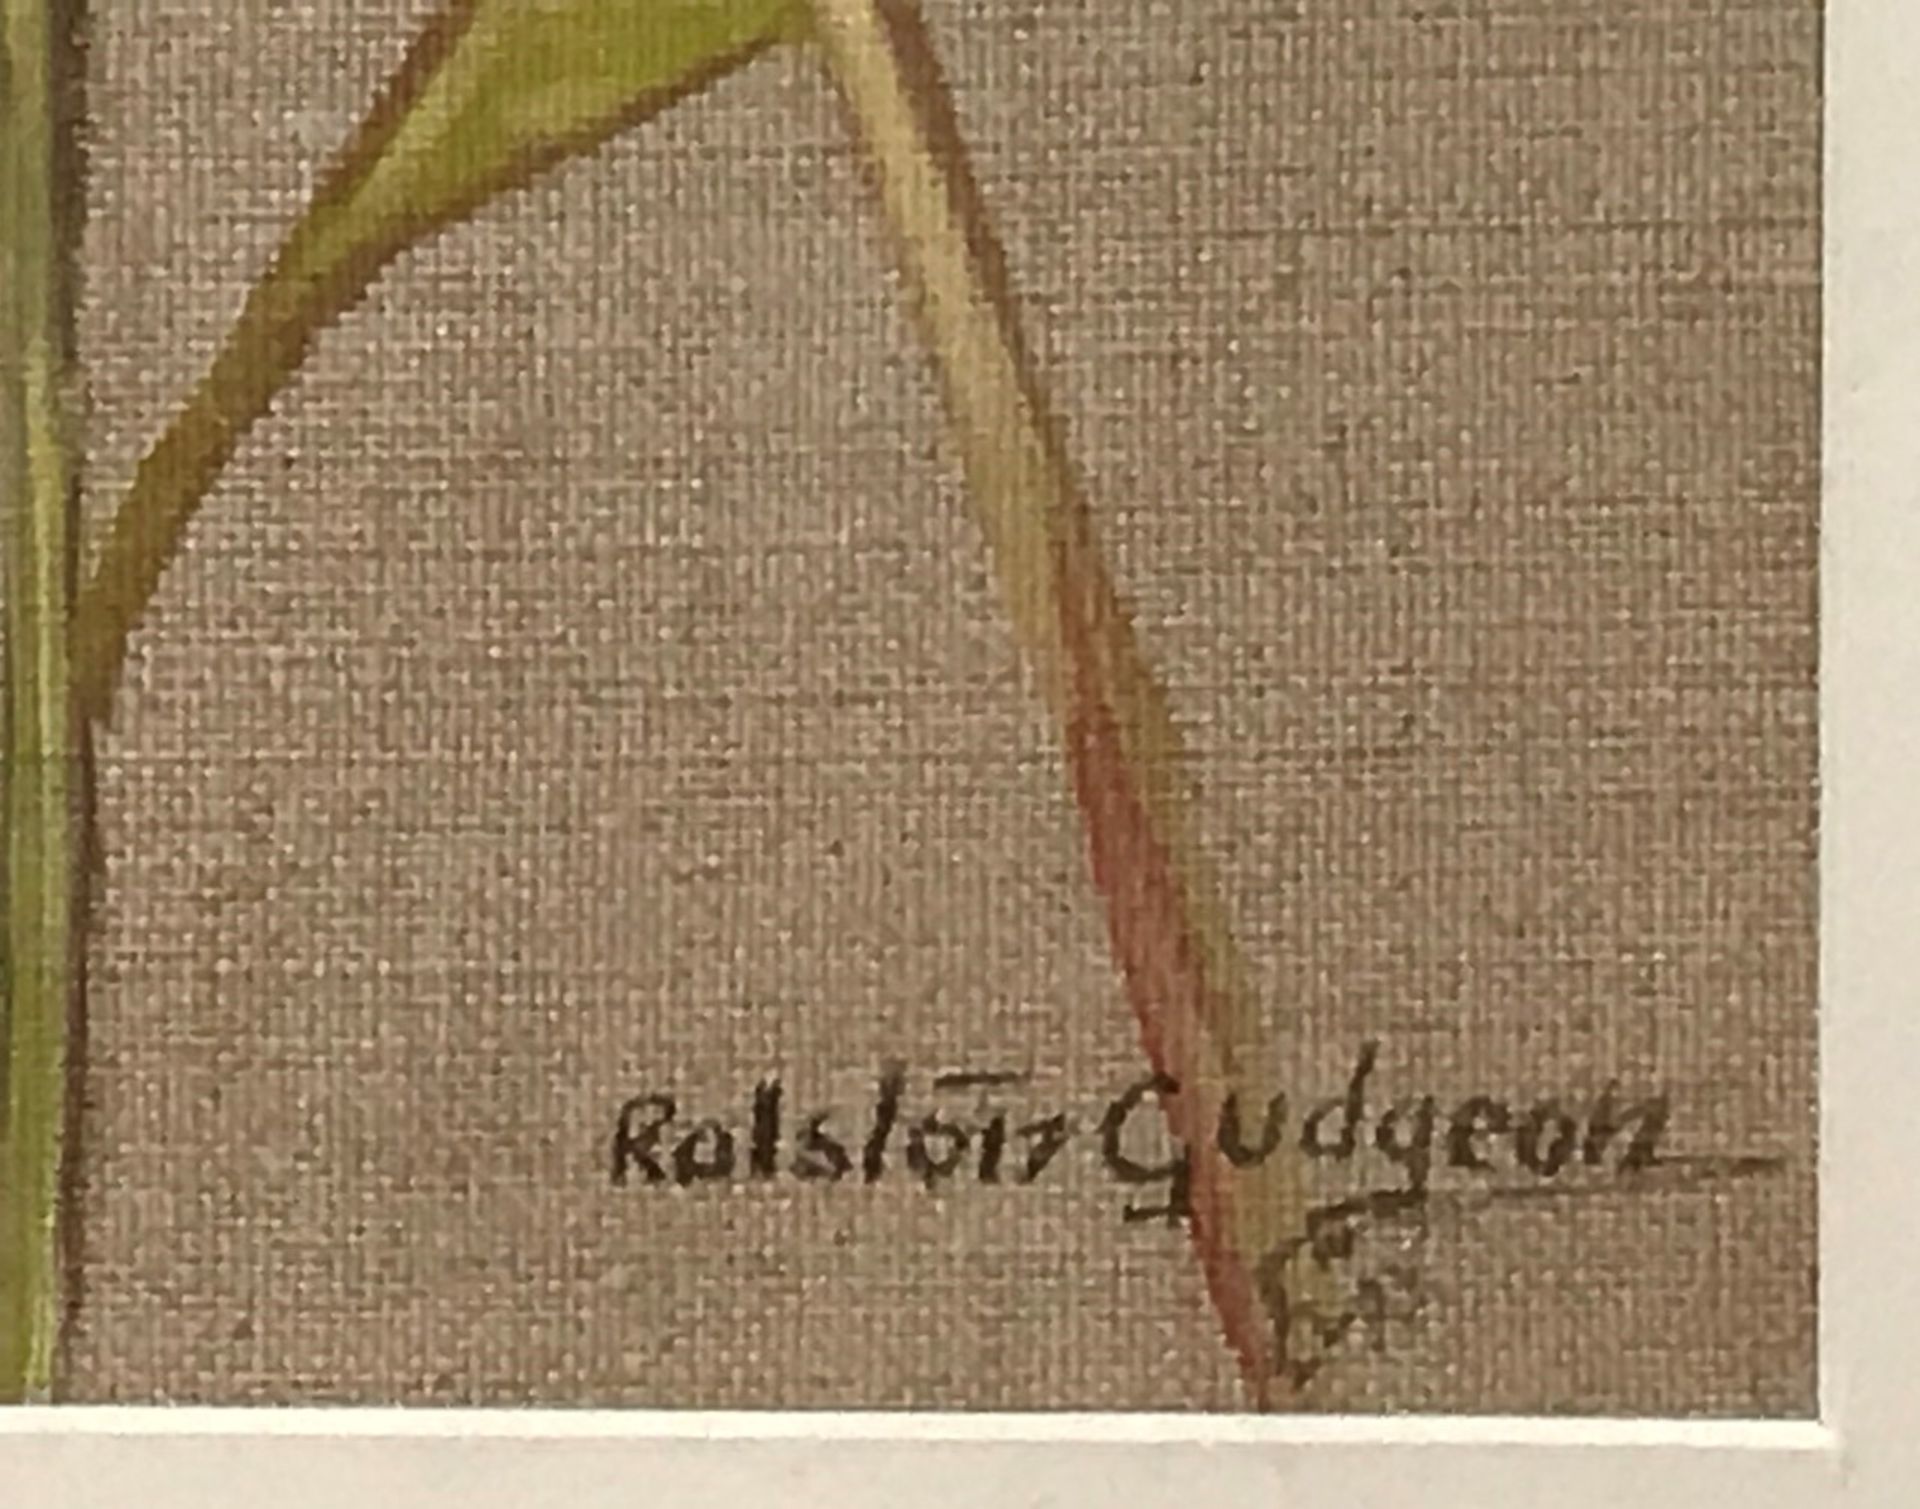 Ralston Gudgeon Rsw (1910 – 1984) Watercolour On Linen Yellow Hammer - Image 5 of 6